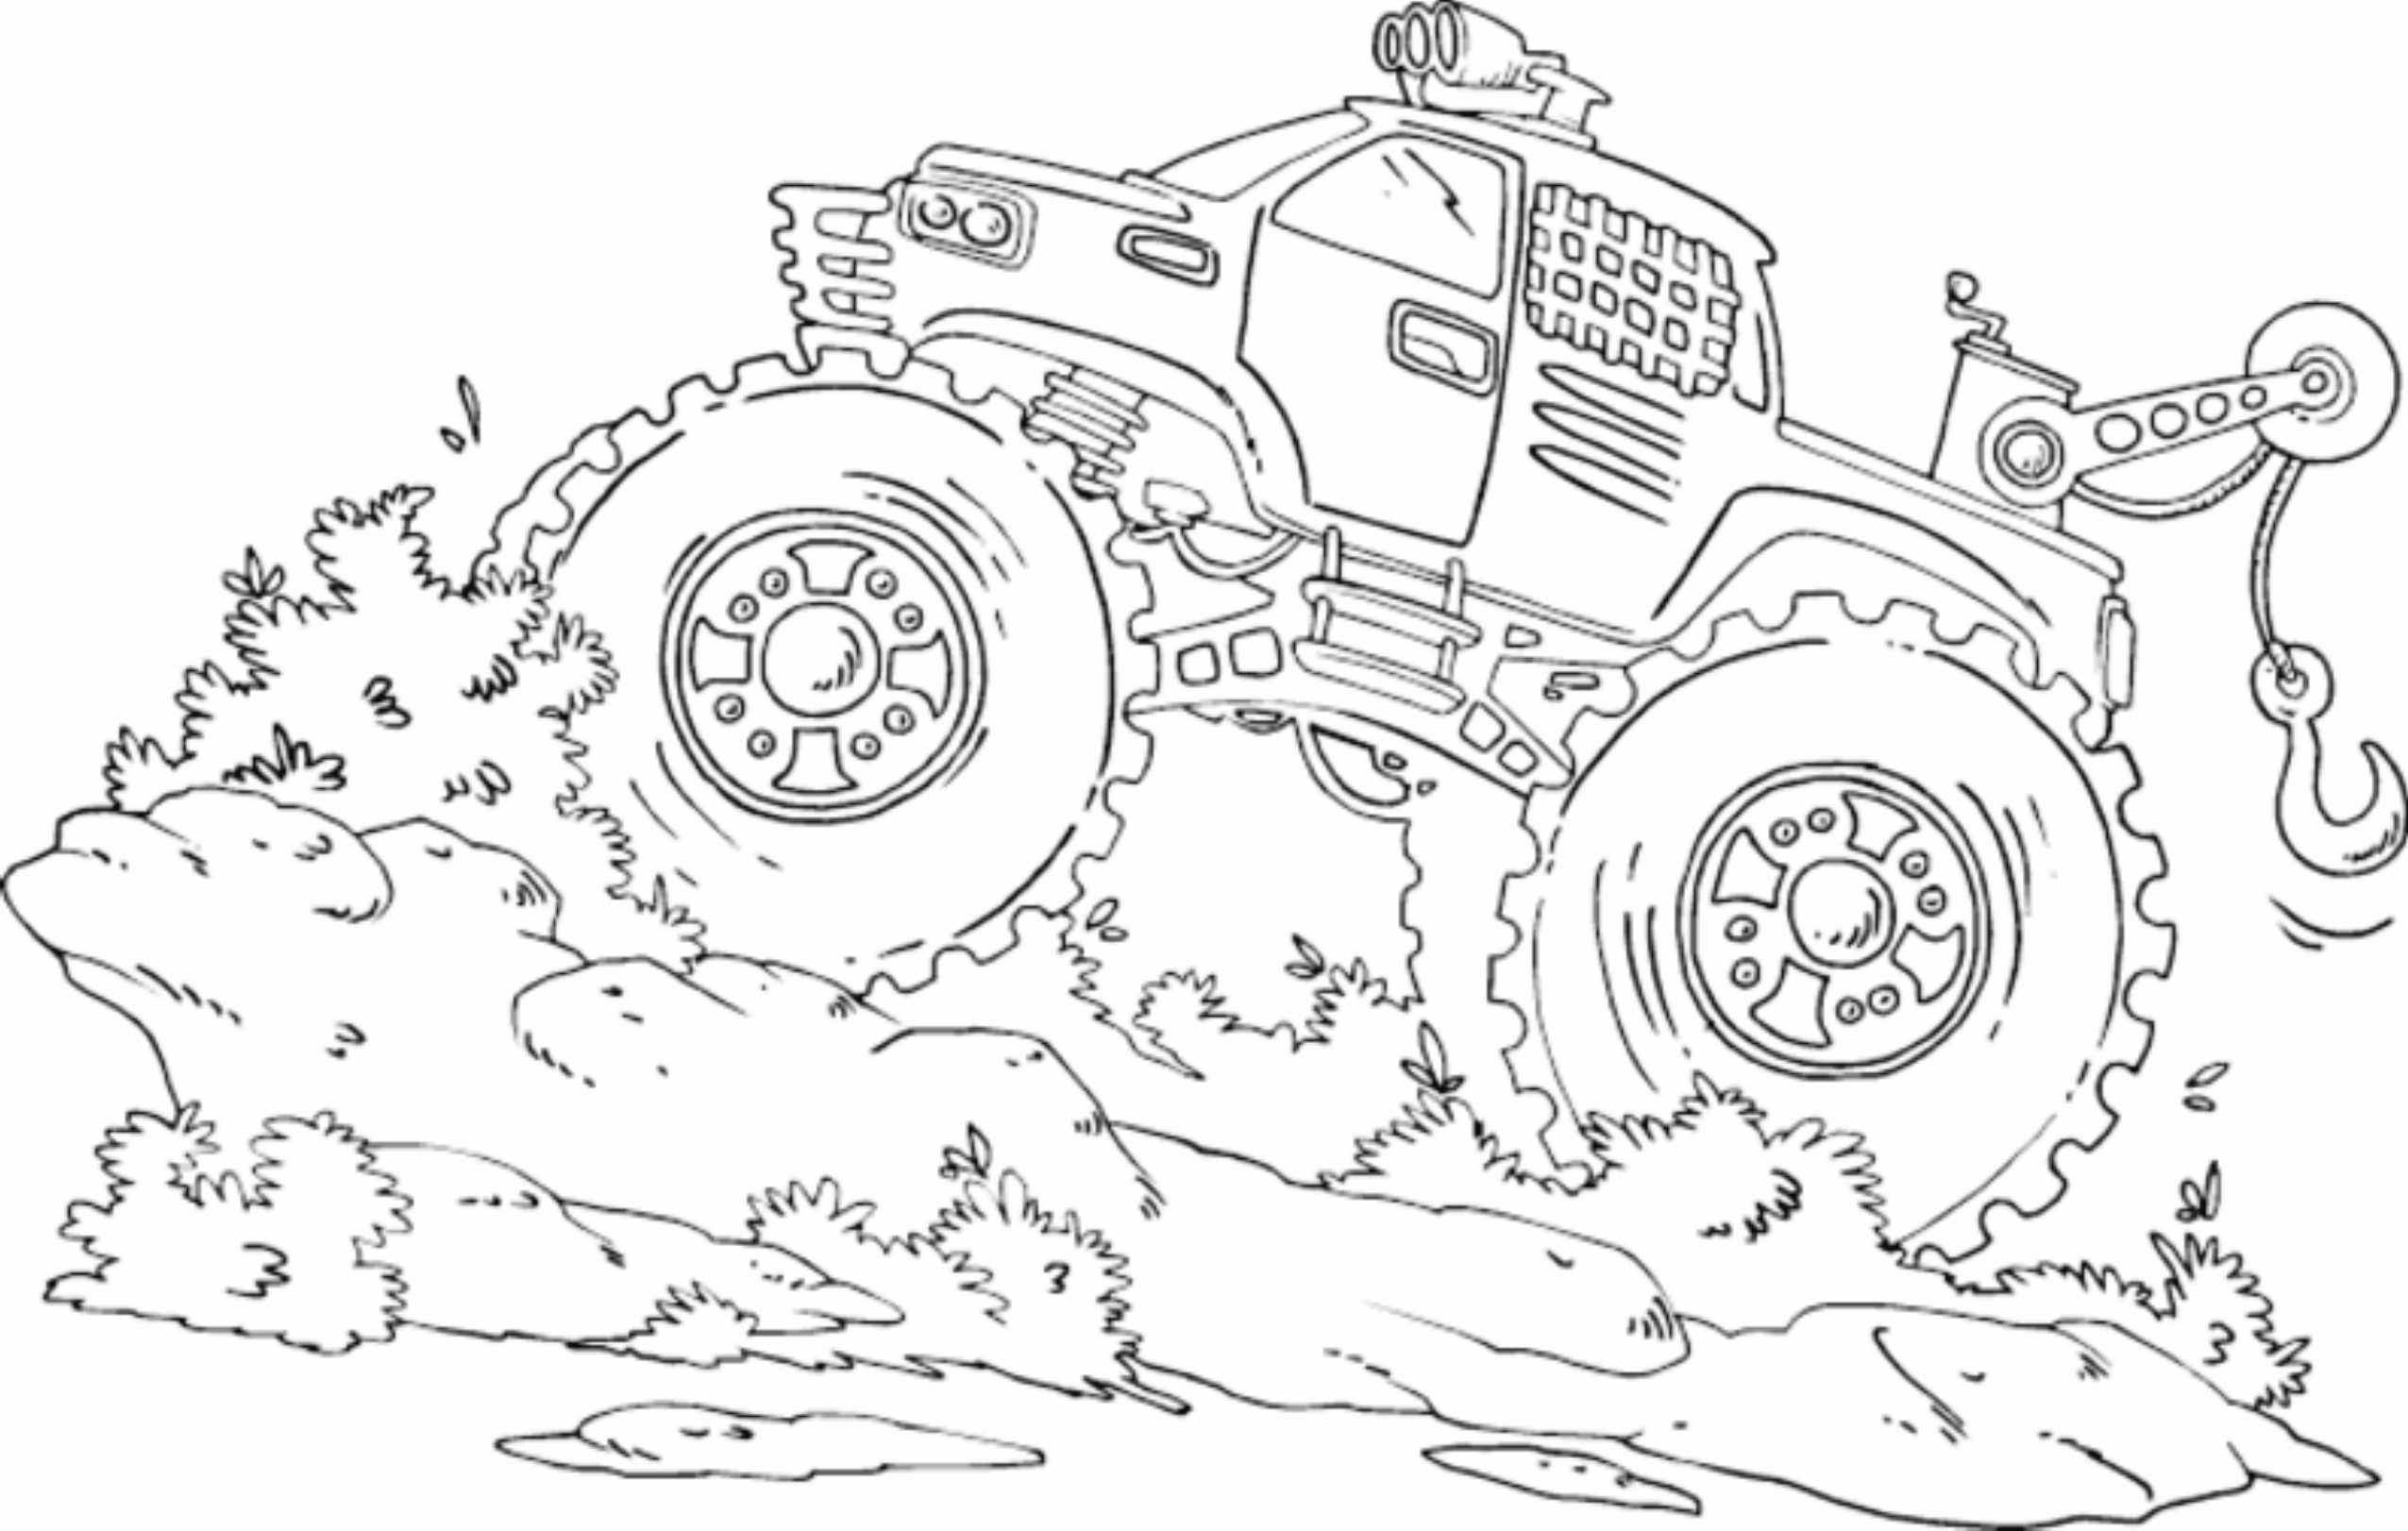 Download blue-thunder-monster-truck-coloring-pages ...